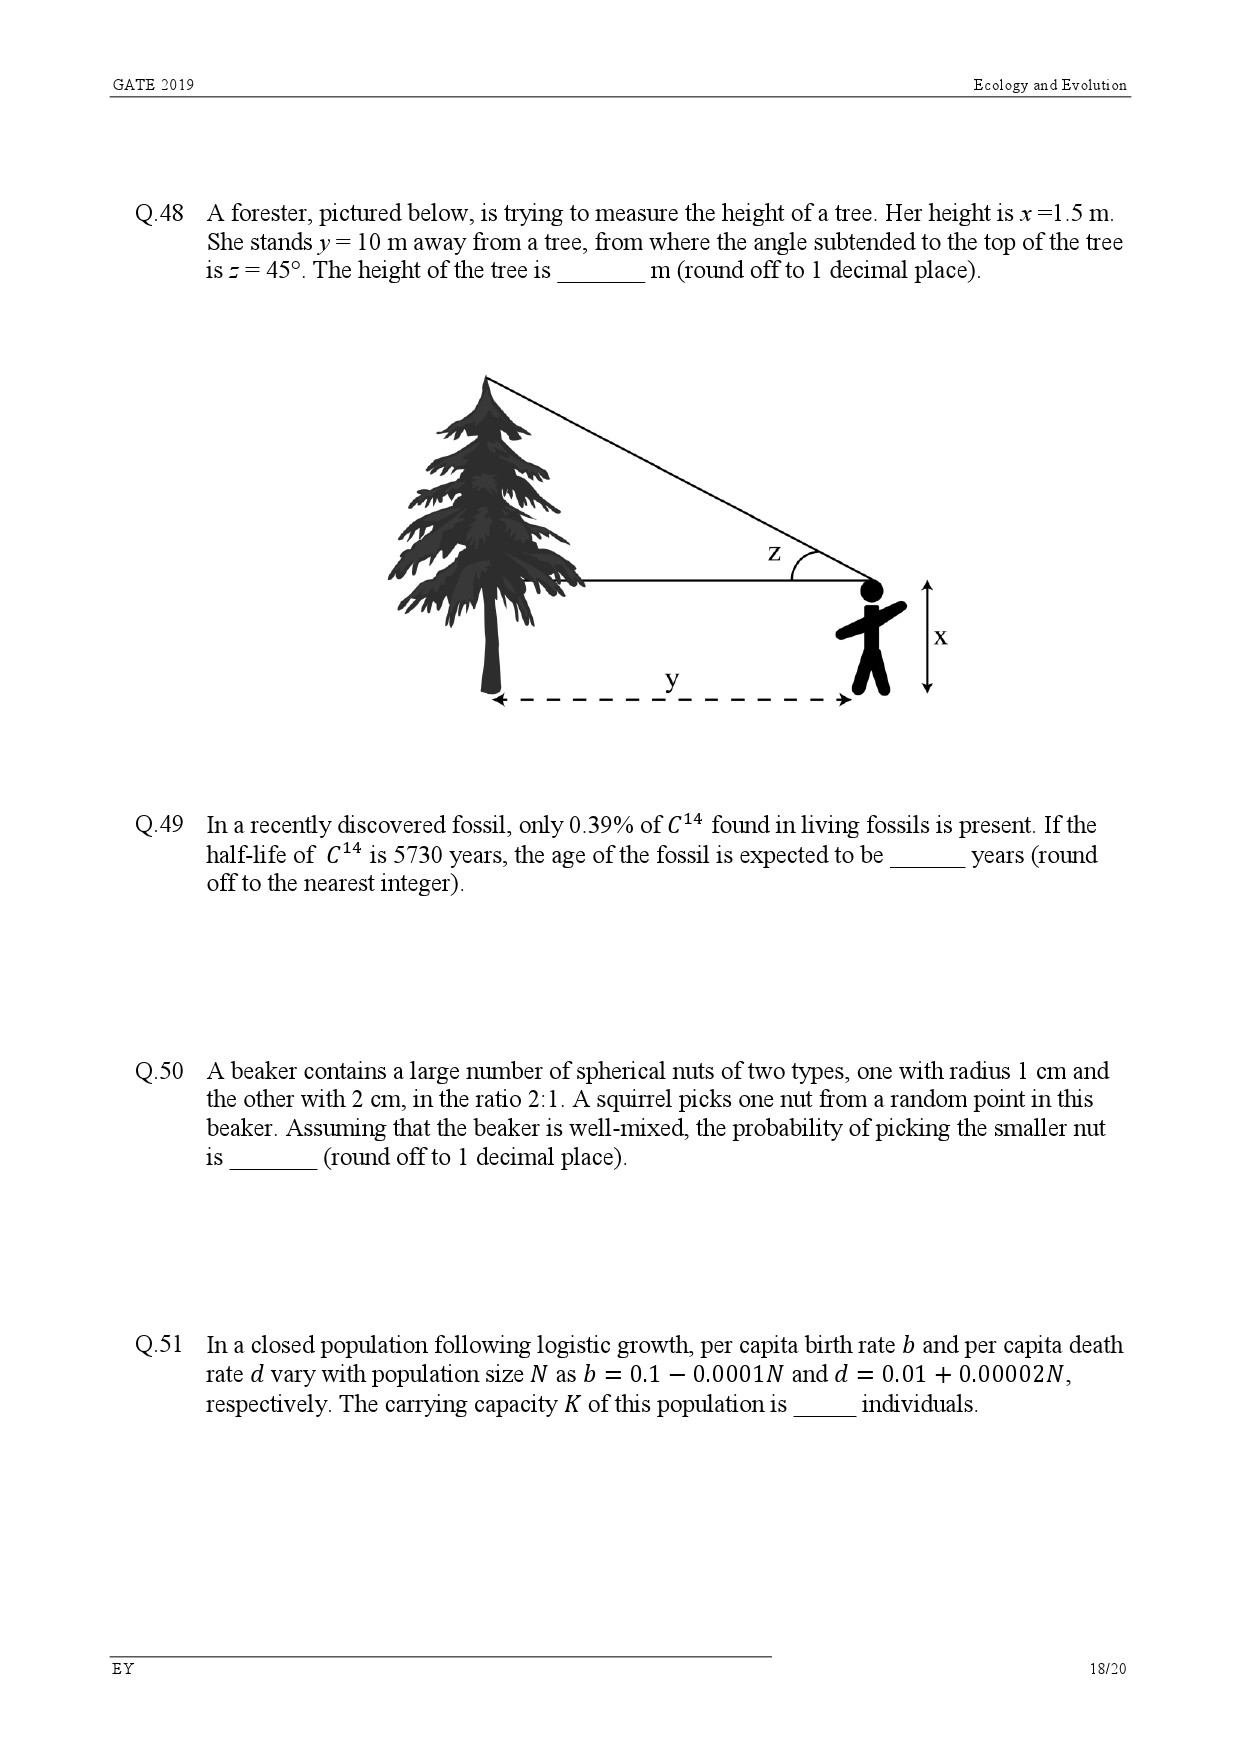 GATE Exam Question Paper 2019 Ecology and Evolution 21